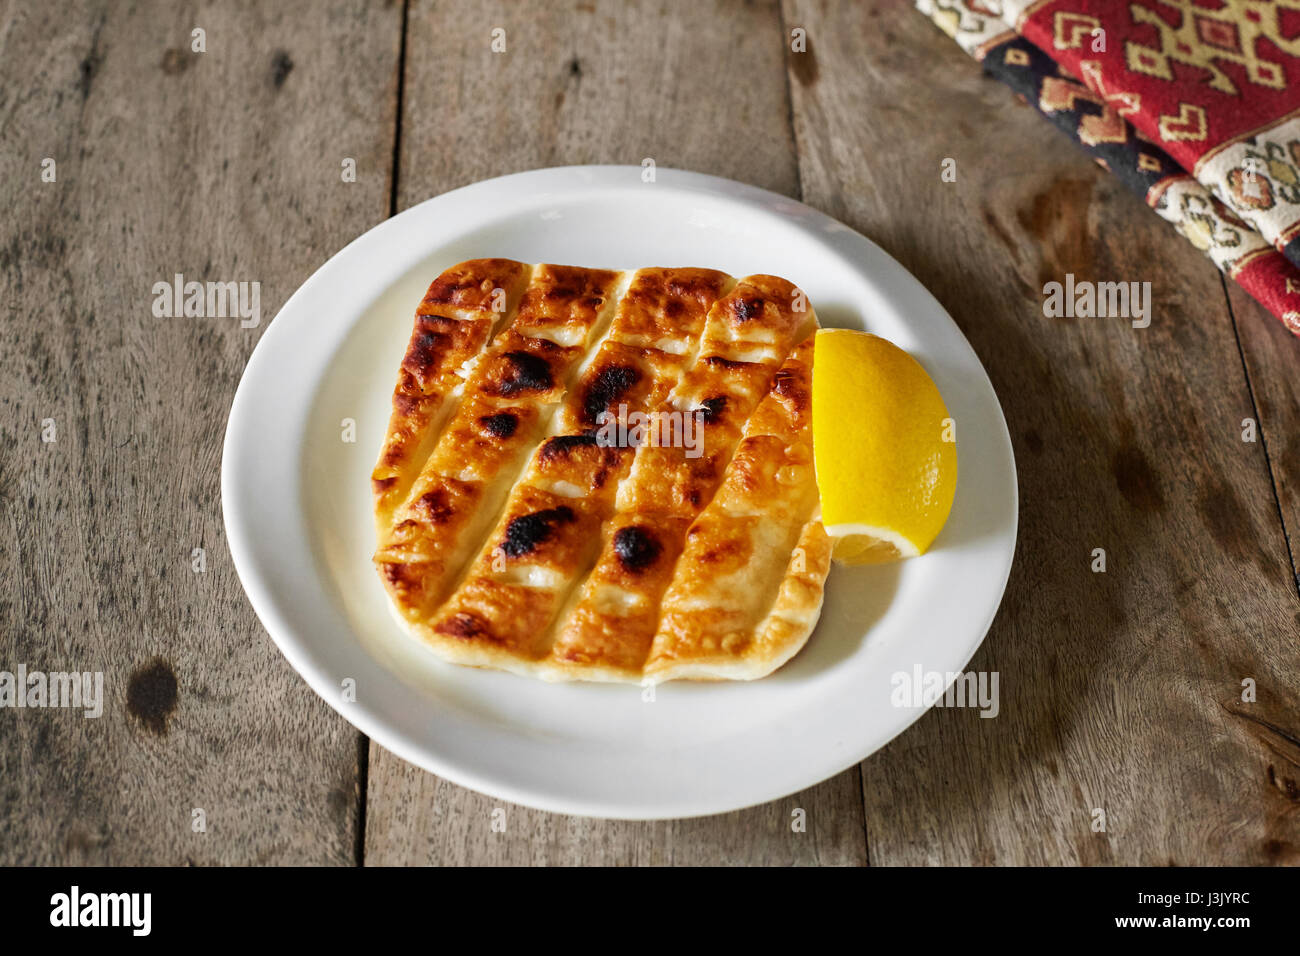 Grilled cheese with lemon. Stock Photo